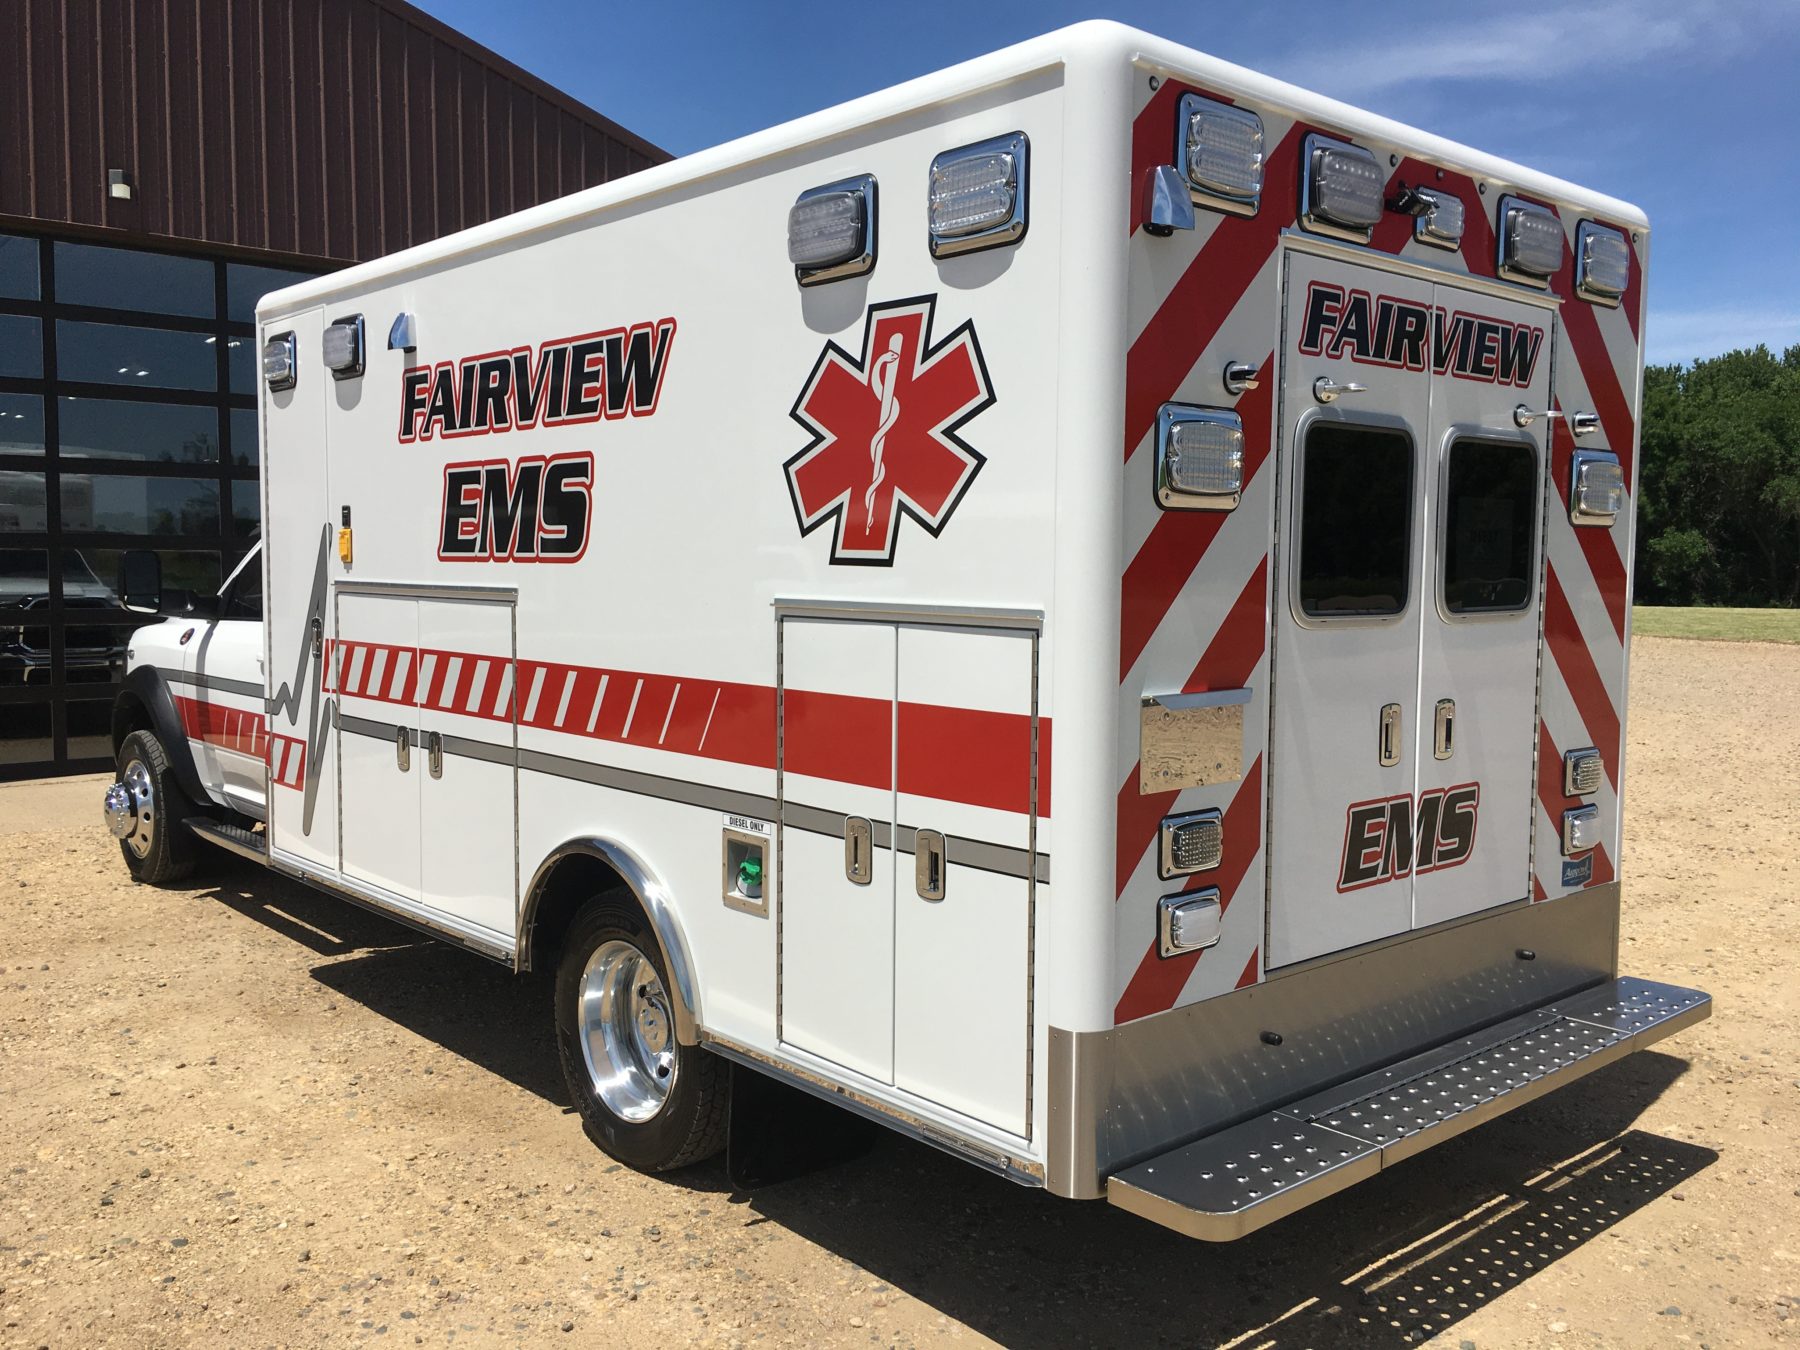 2021 Ram 5500 4x4 Heavy Duty Ambulance For Sale – Picture 5